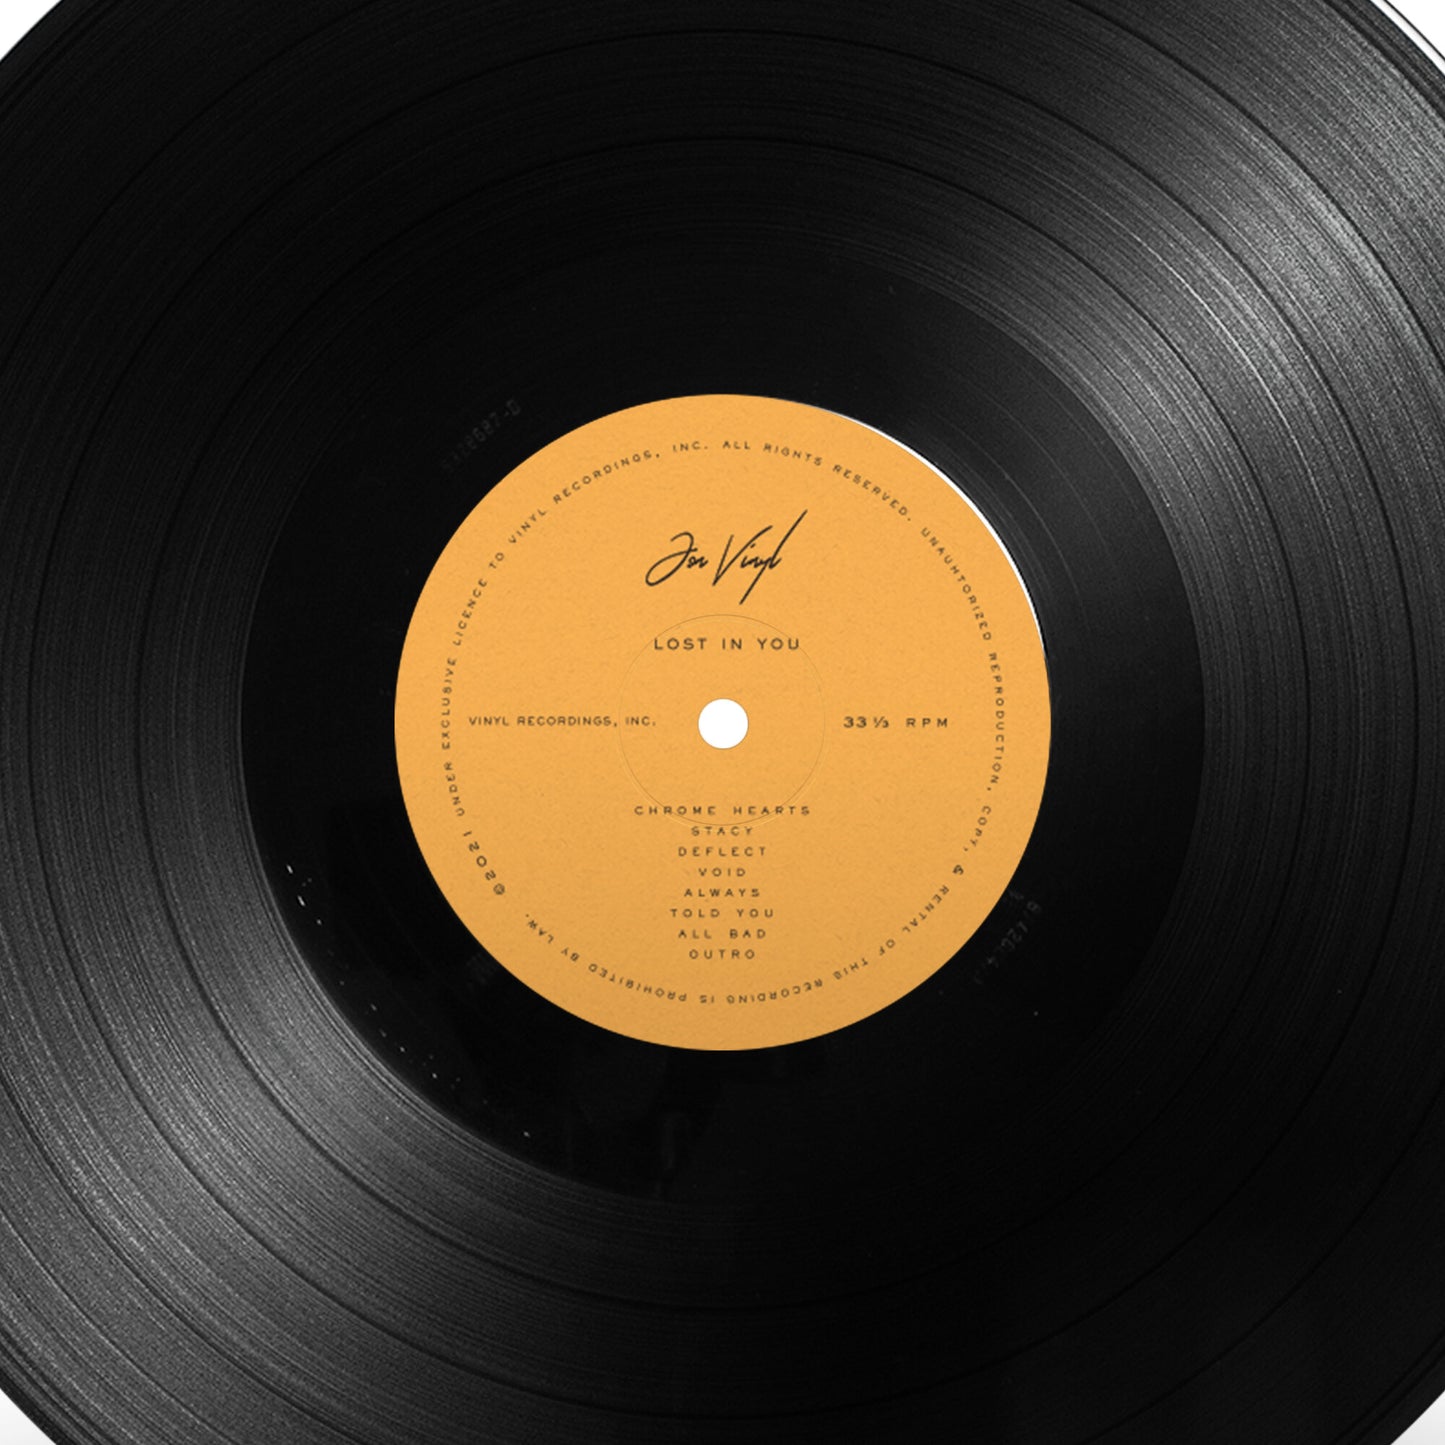 'LOST IN YOU' VINYL RECORD